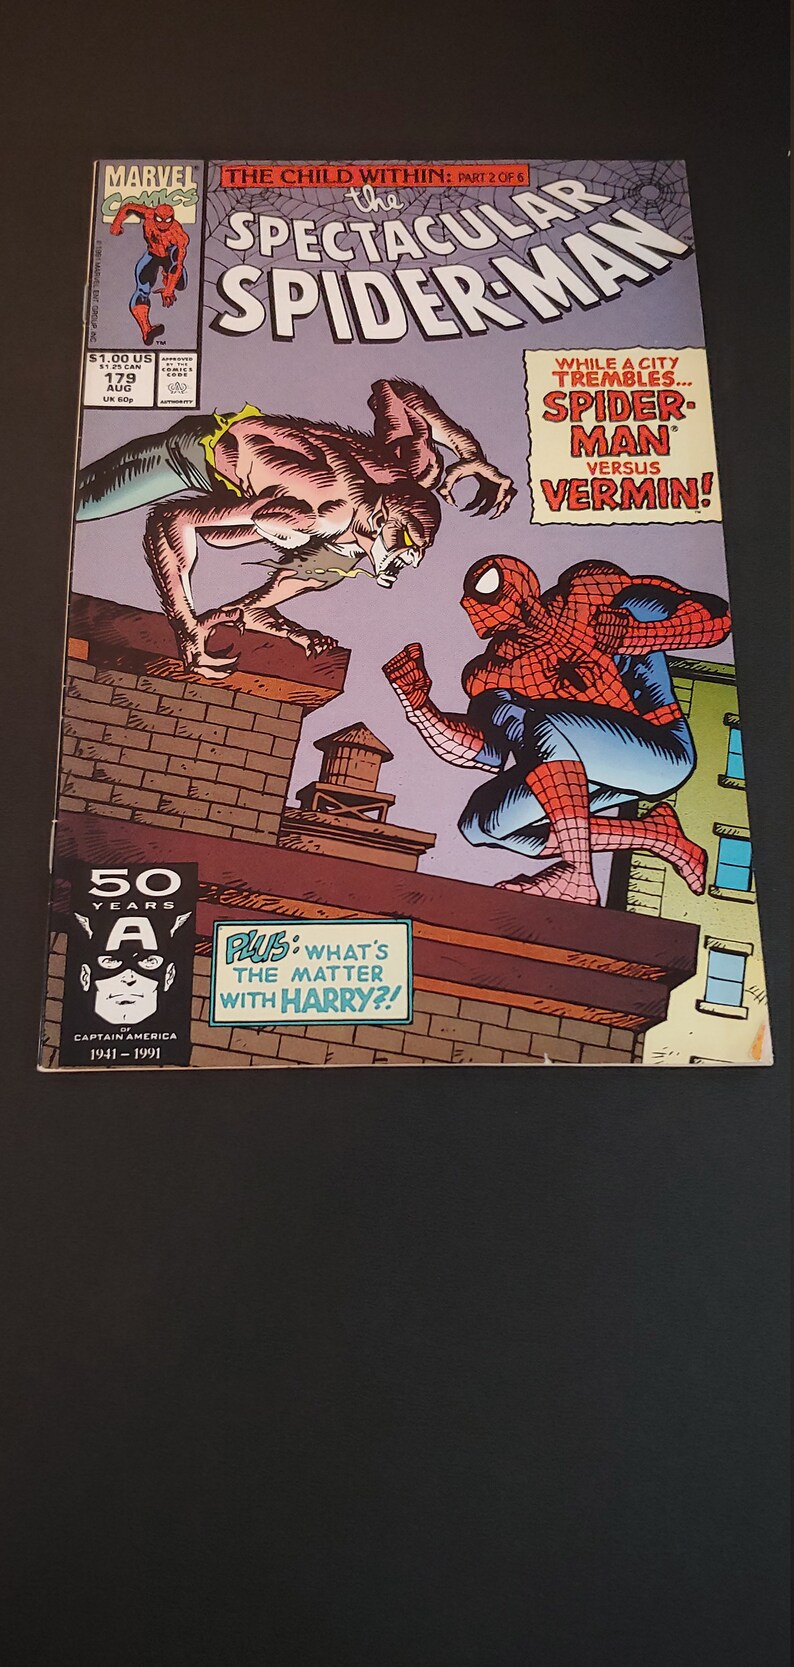 The Spectacular Spider-Man Spasm price #179 Today's only